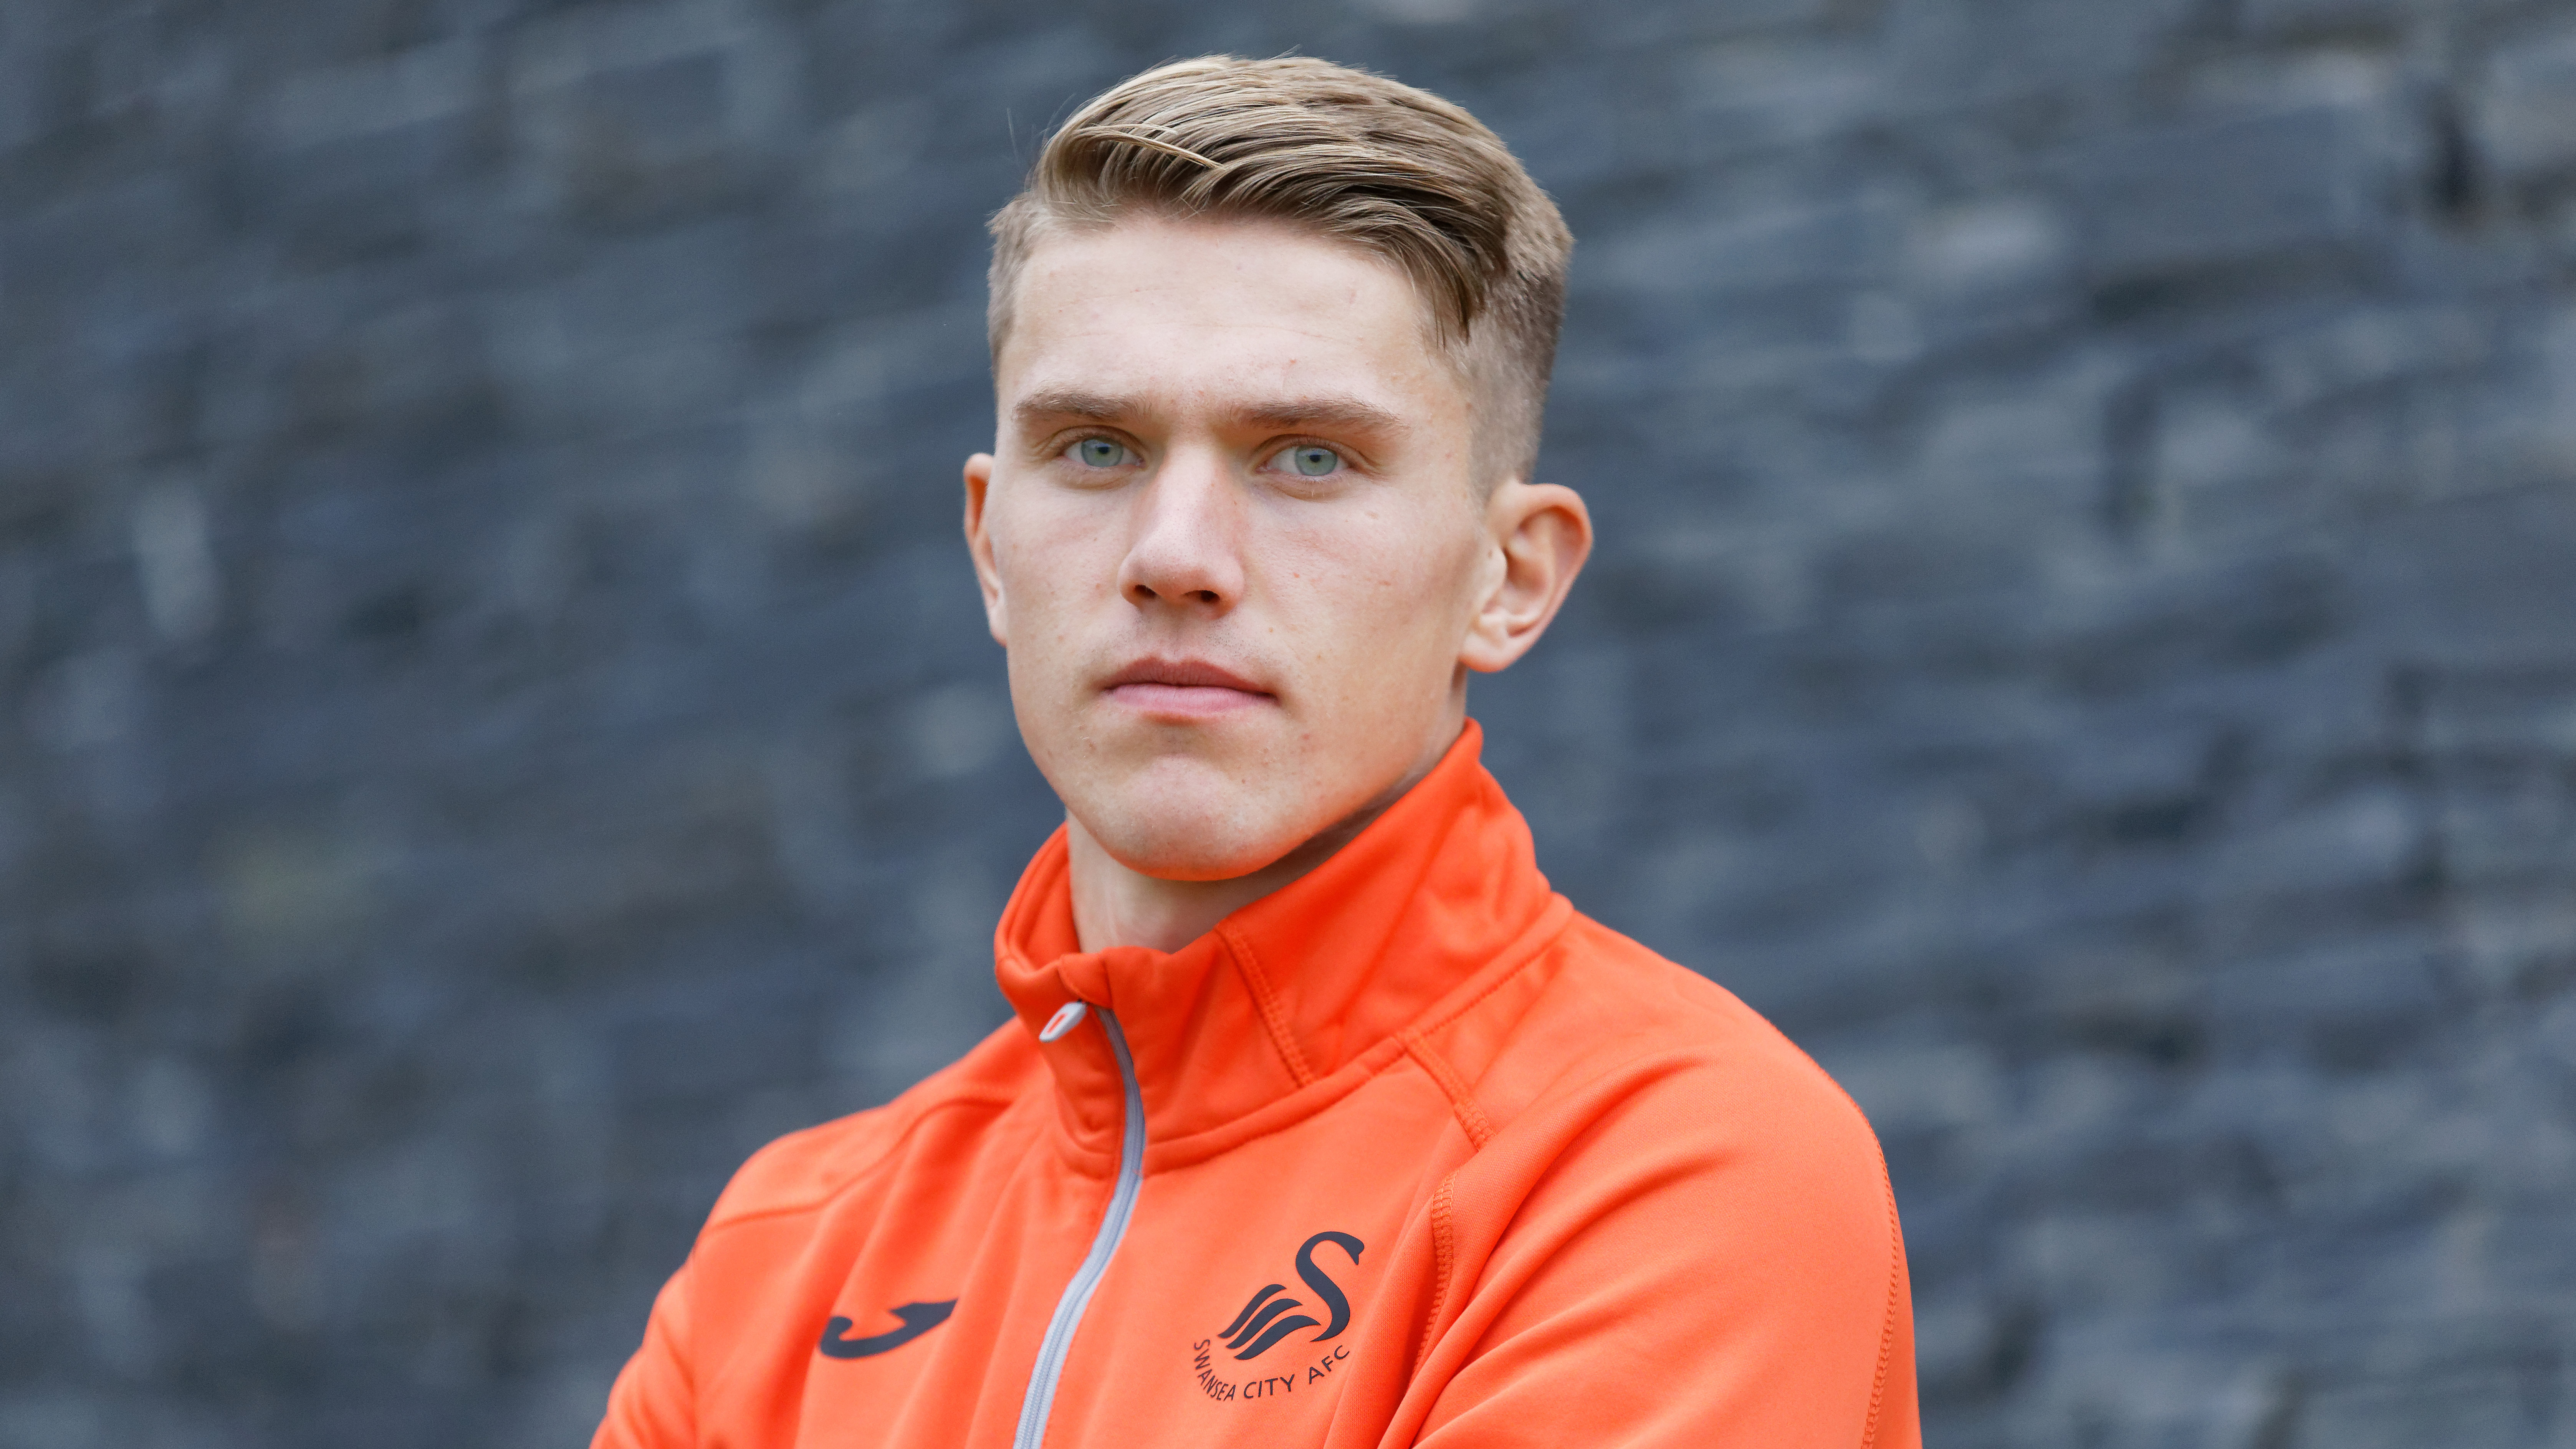  Viktor Gyokeres, a Swedish professional footballer who plays as a striker for EFL Championship club Swansea City, is the subject of transfer rumours linking him with a move to Real Madrid.